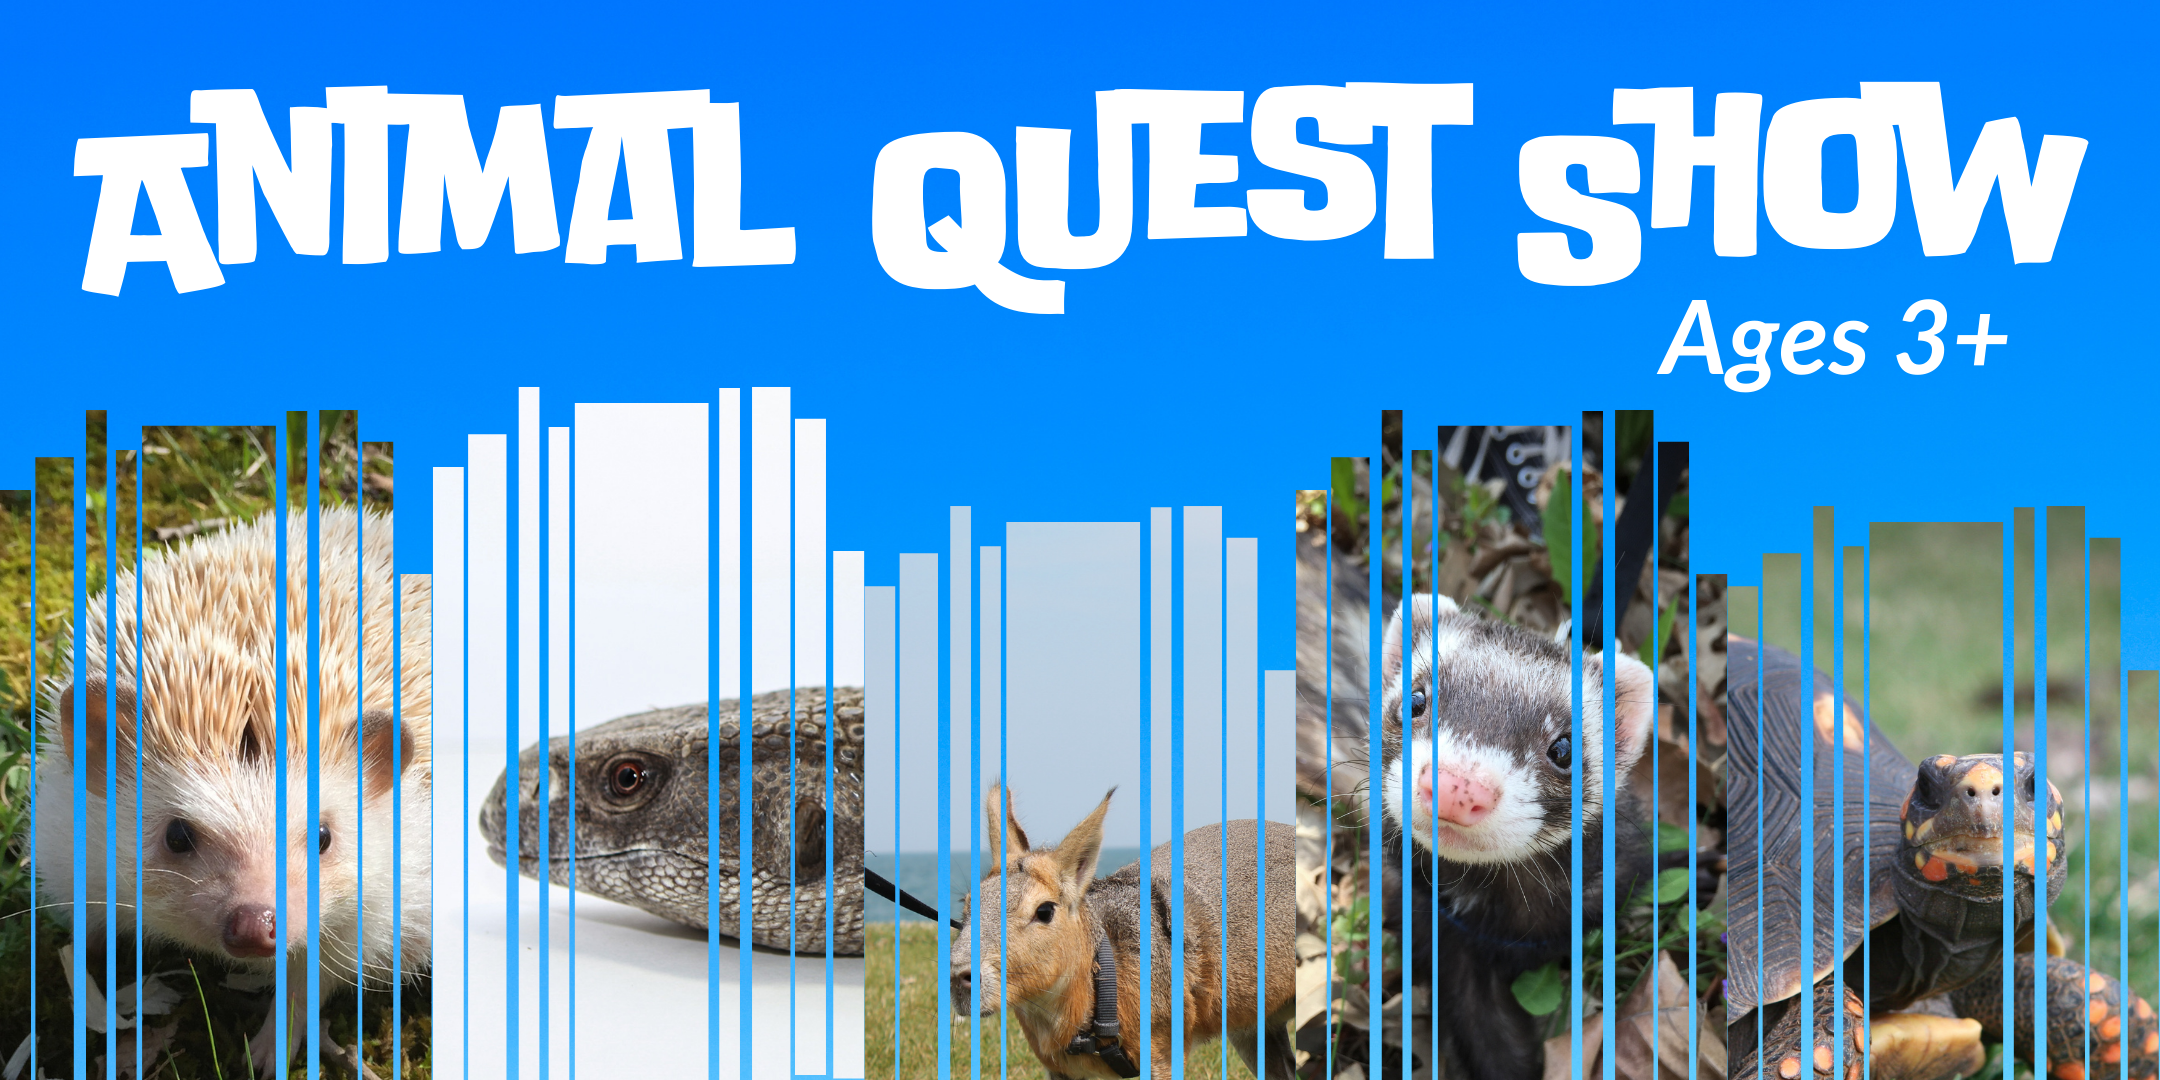 Image of "Animal Quest Show for Ages 3+"